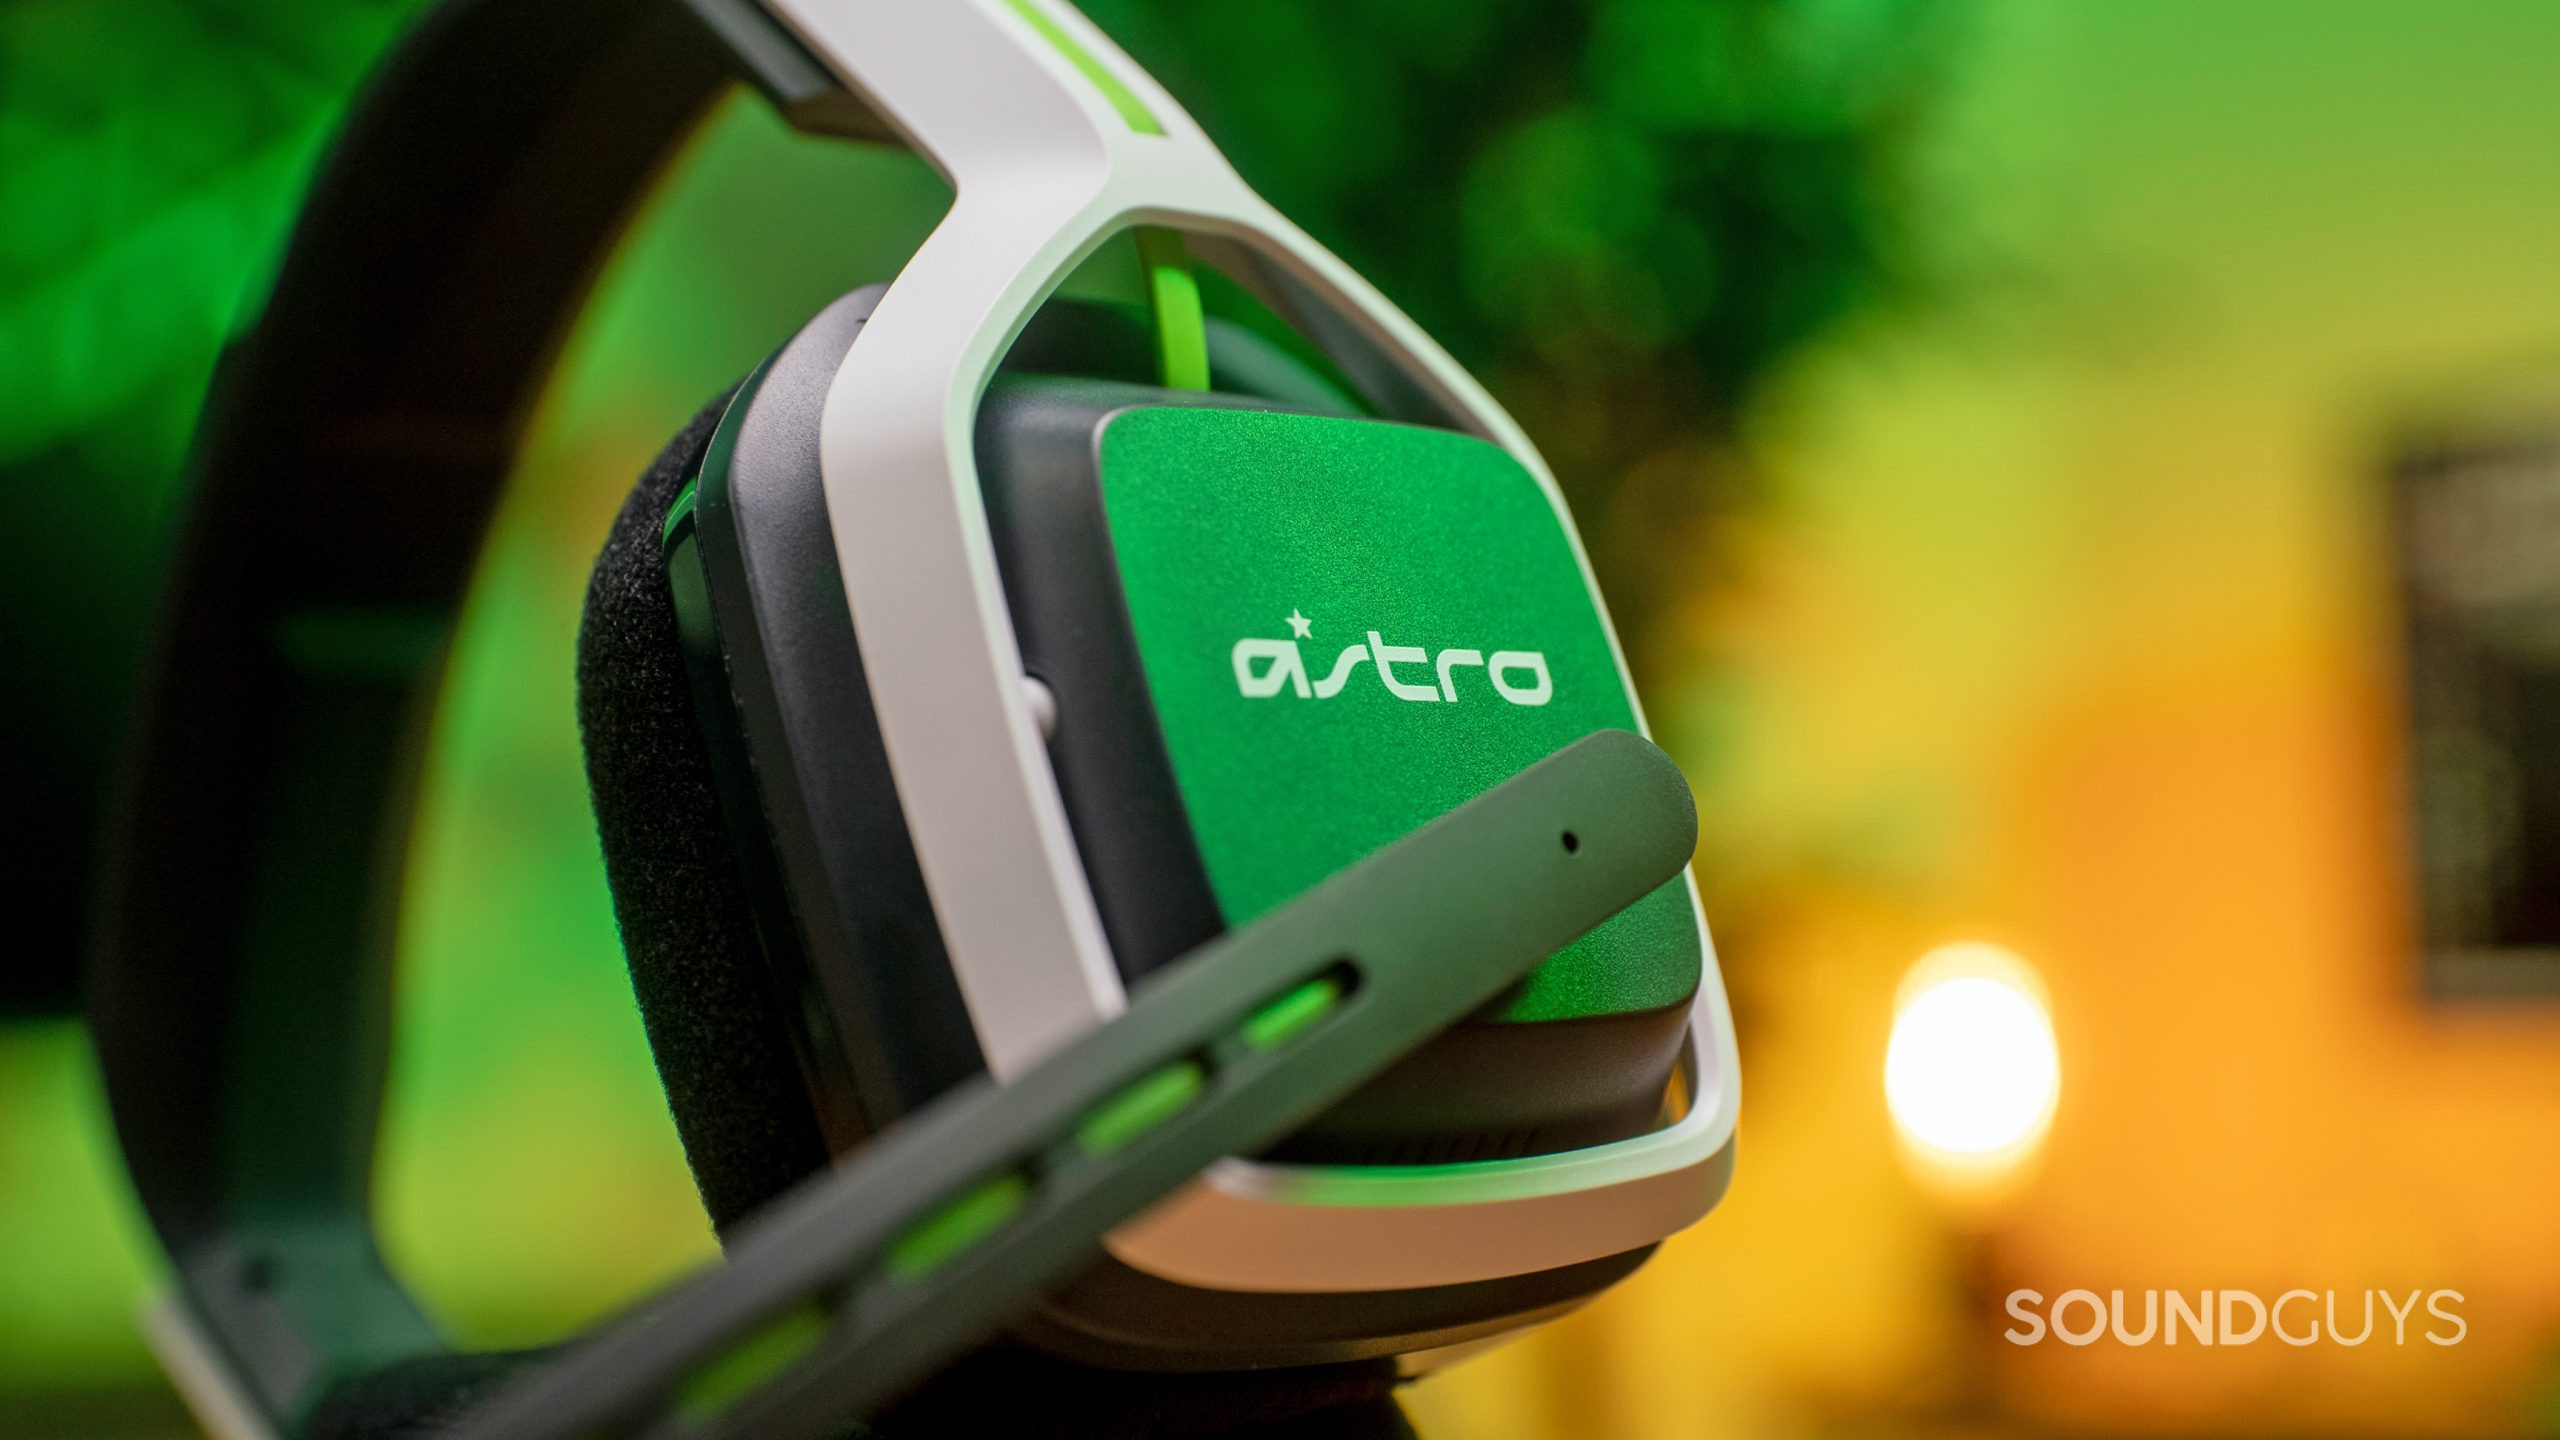 The Astro A20 gaming headset lays on its side, showing its side panel and microphone.